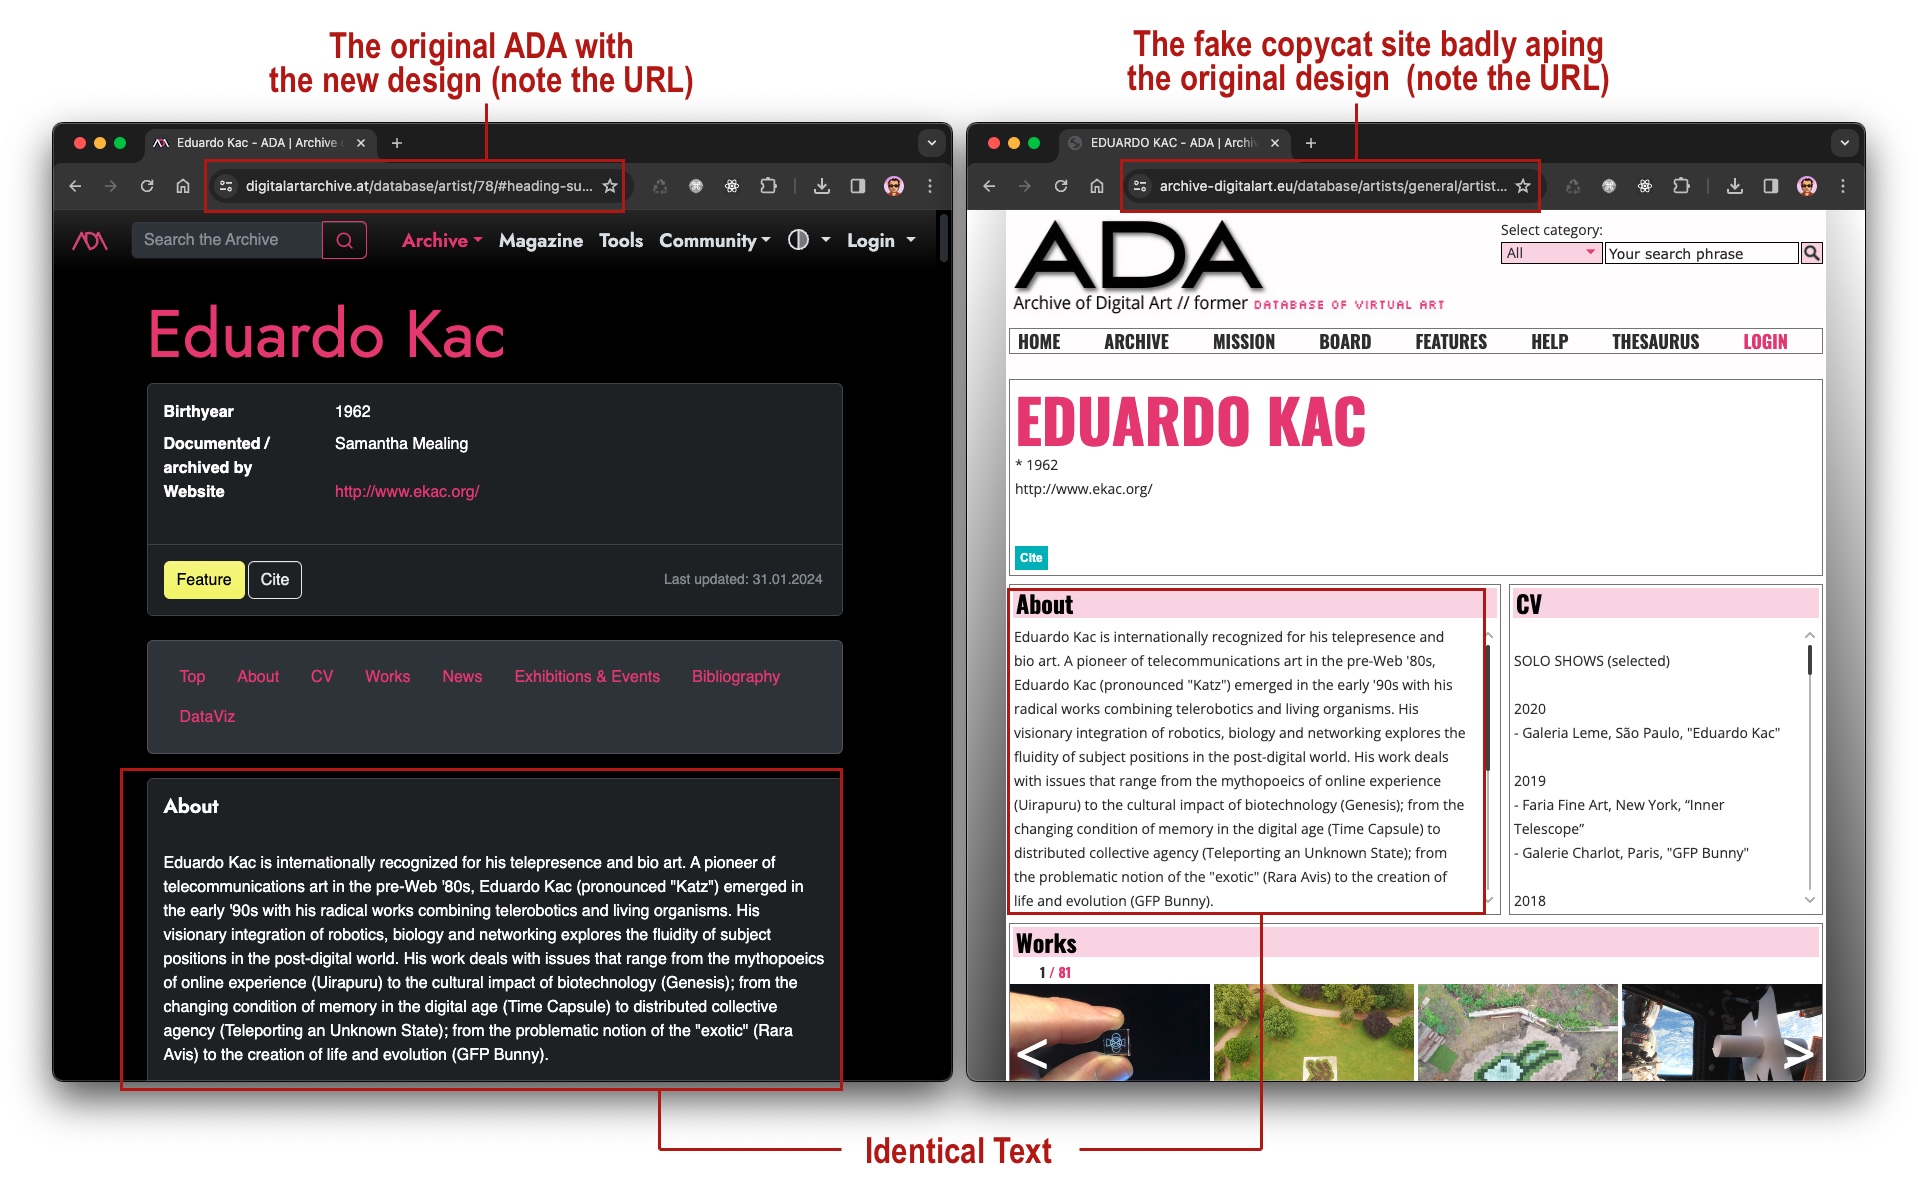 A comparison between the relaunched ADA site and the copycat site